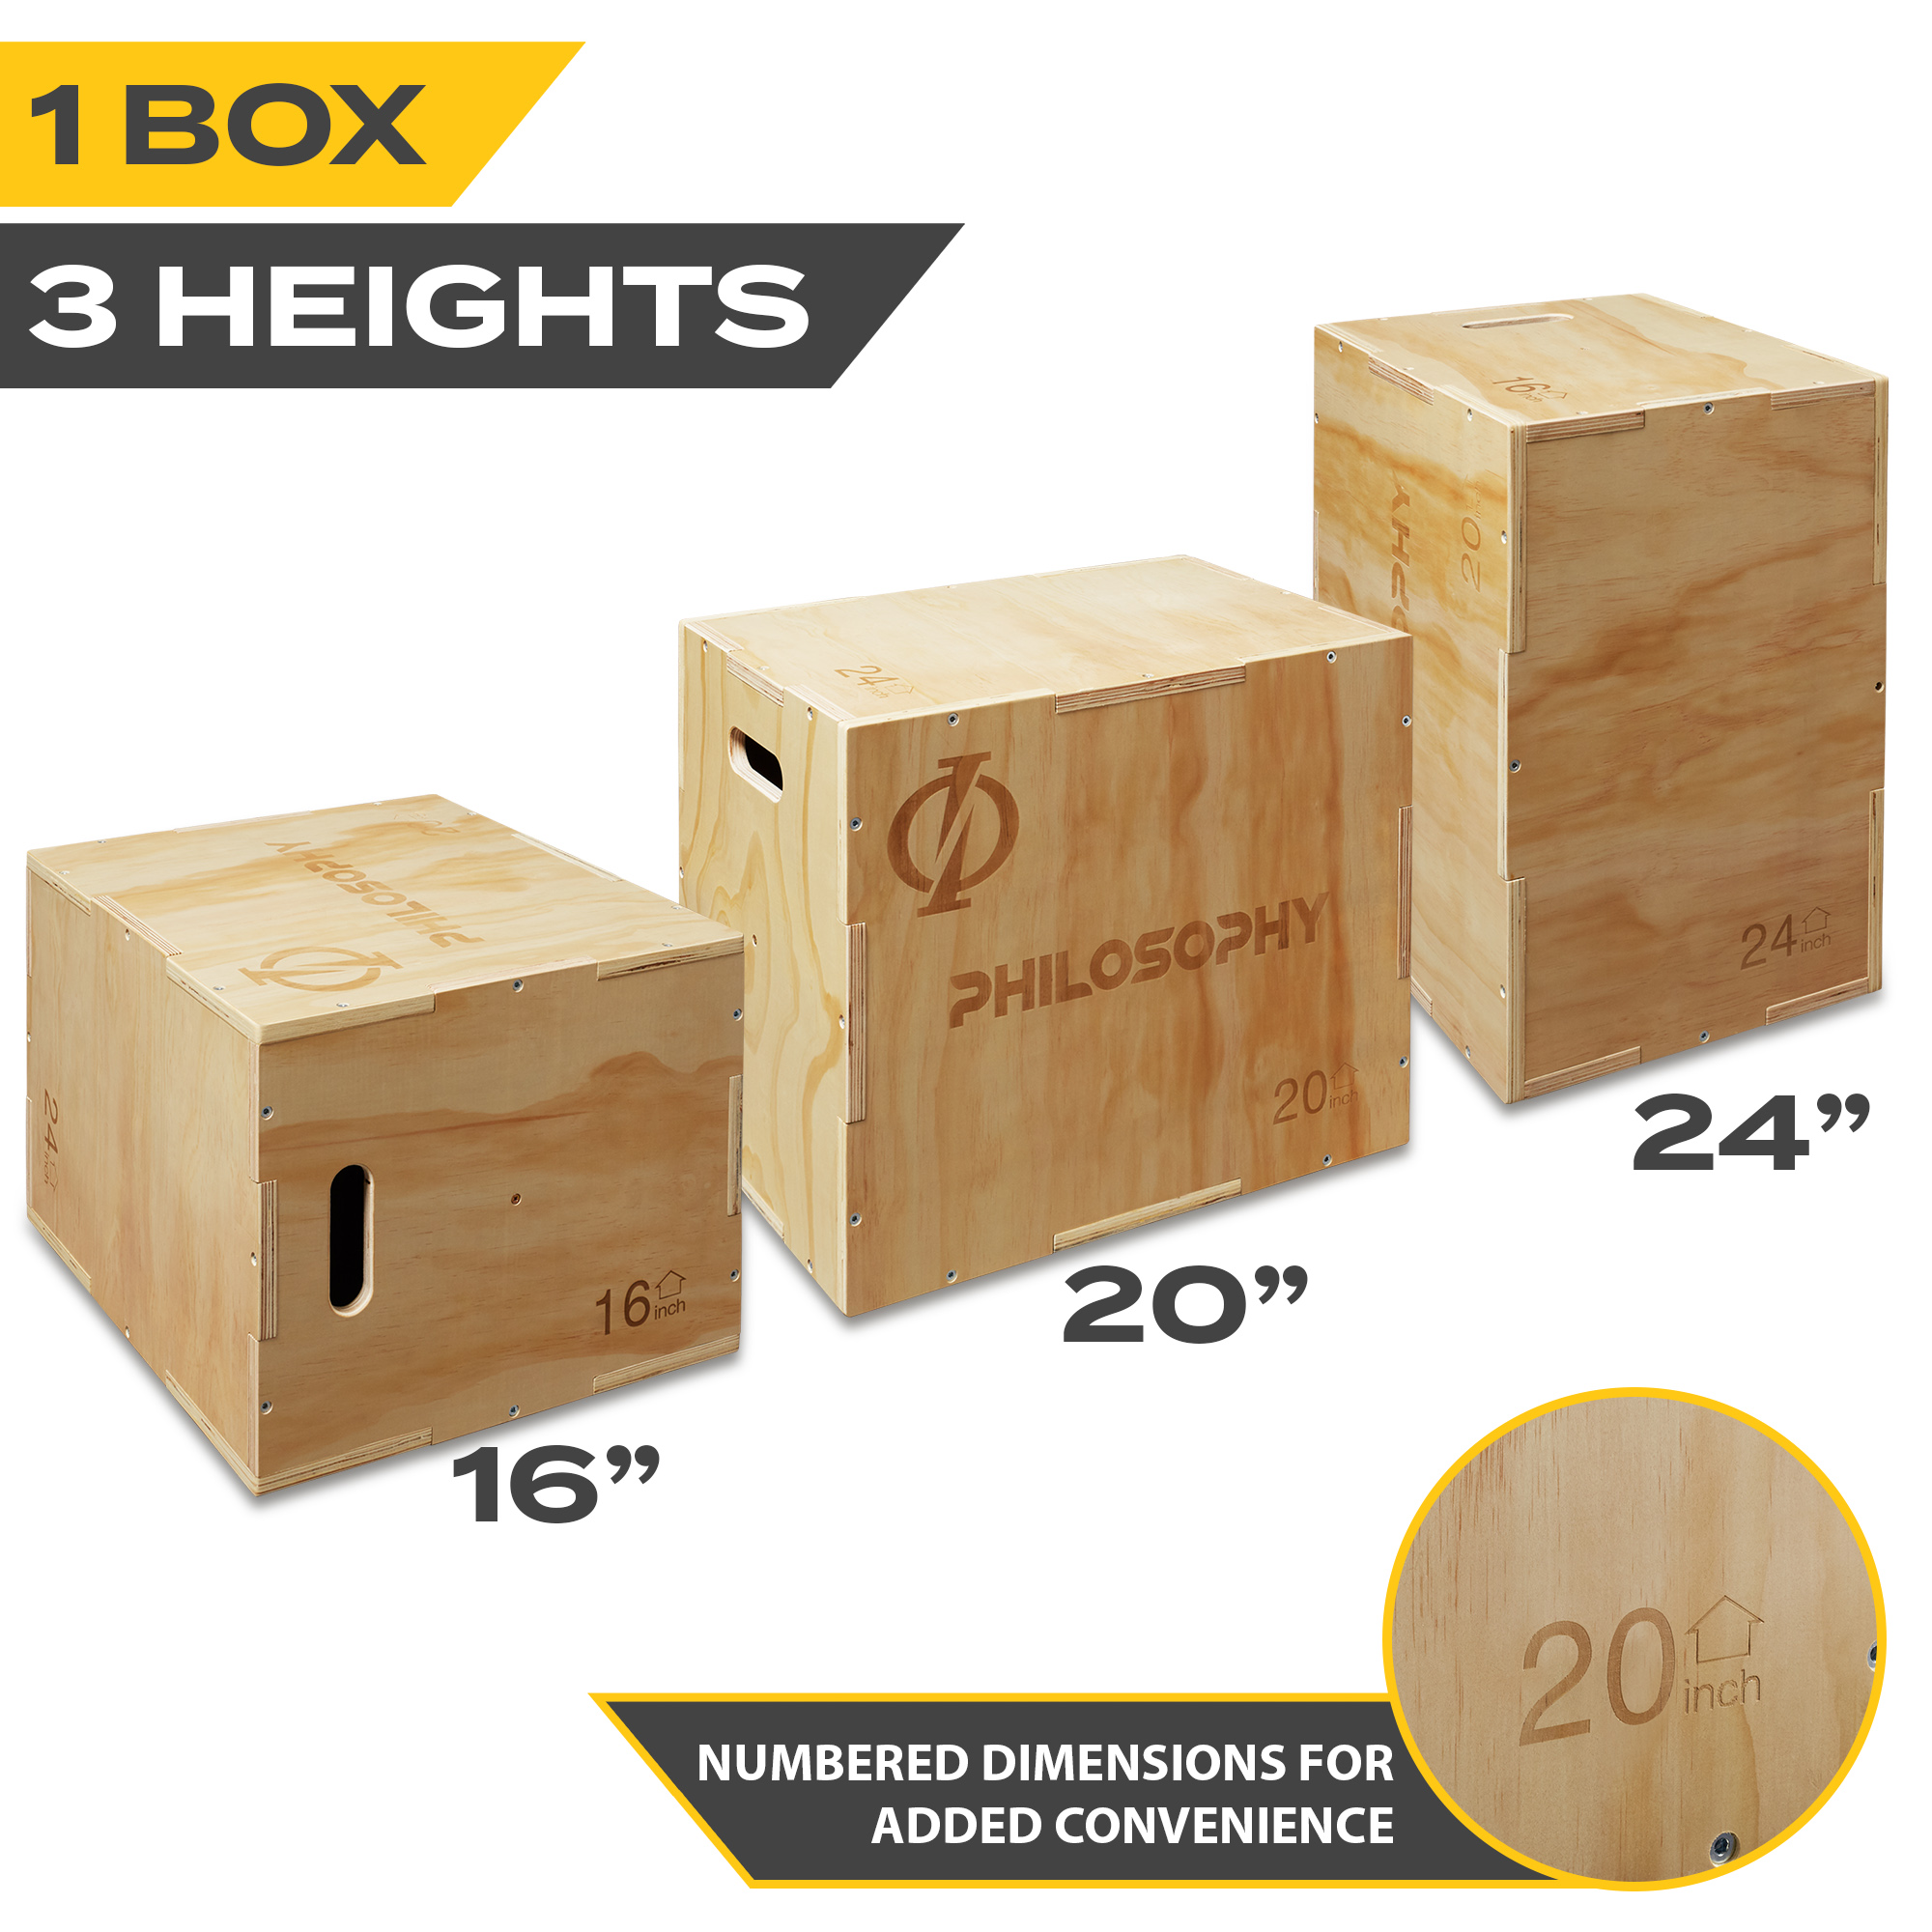 Philosophy Gym 3 in 1 Wood Plyometric Box, 24" x 20" x 16" Jumping Box for Training & Conditioning